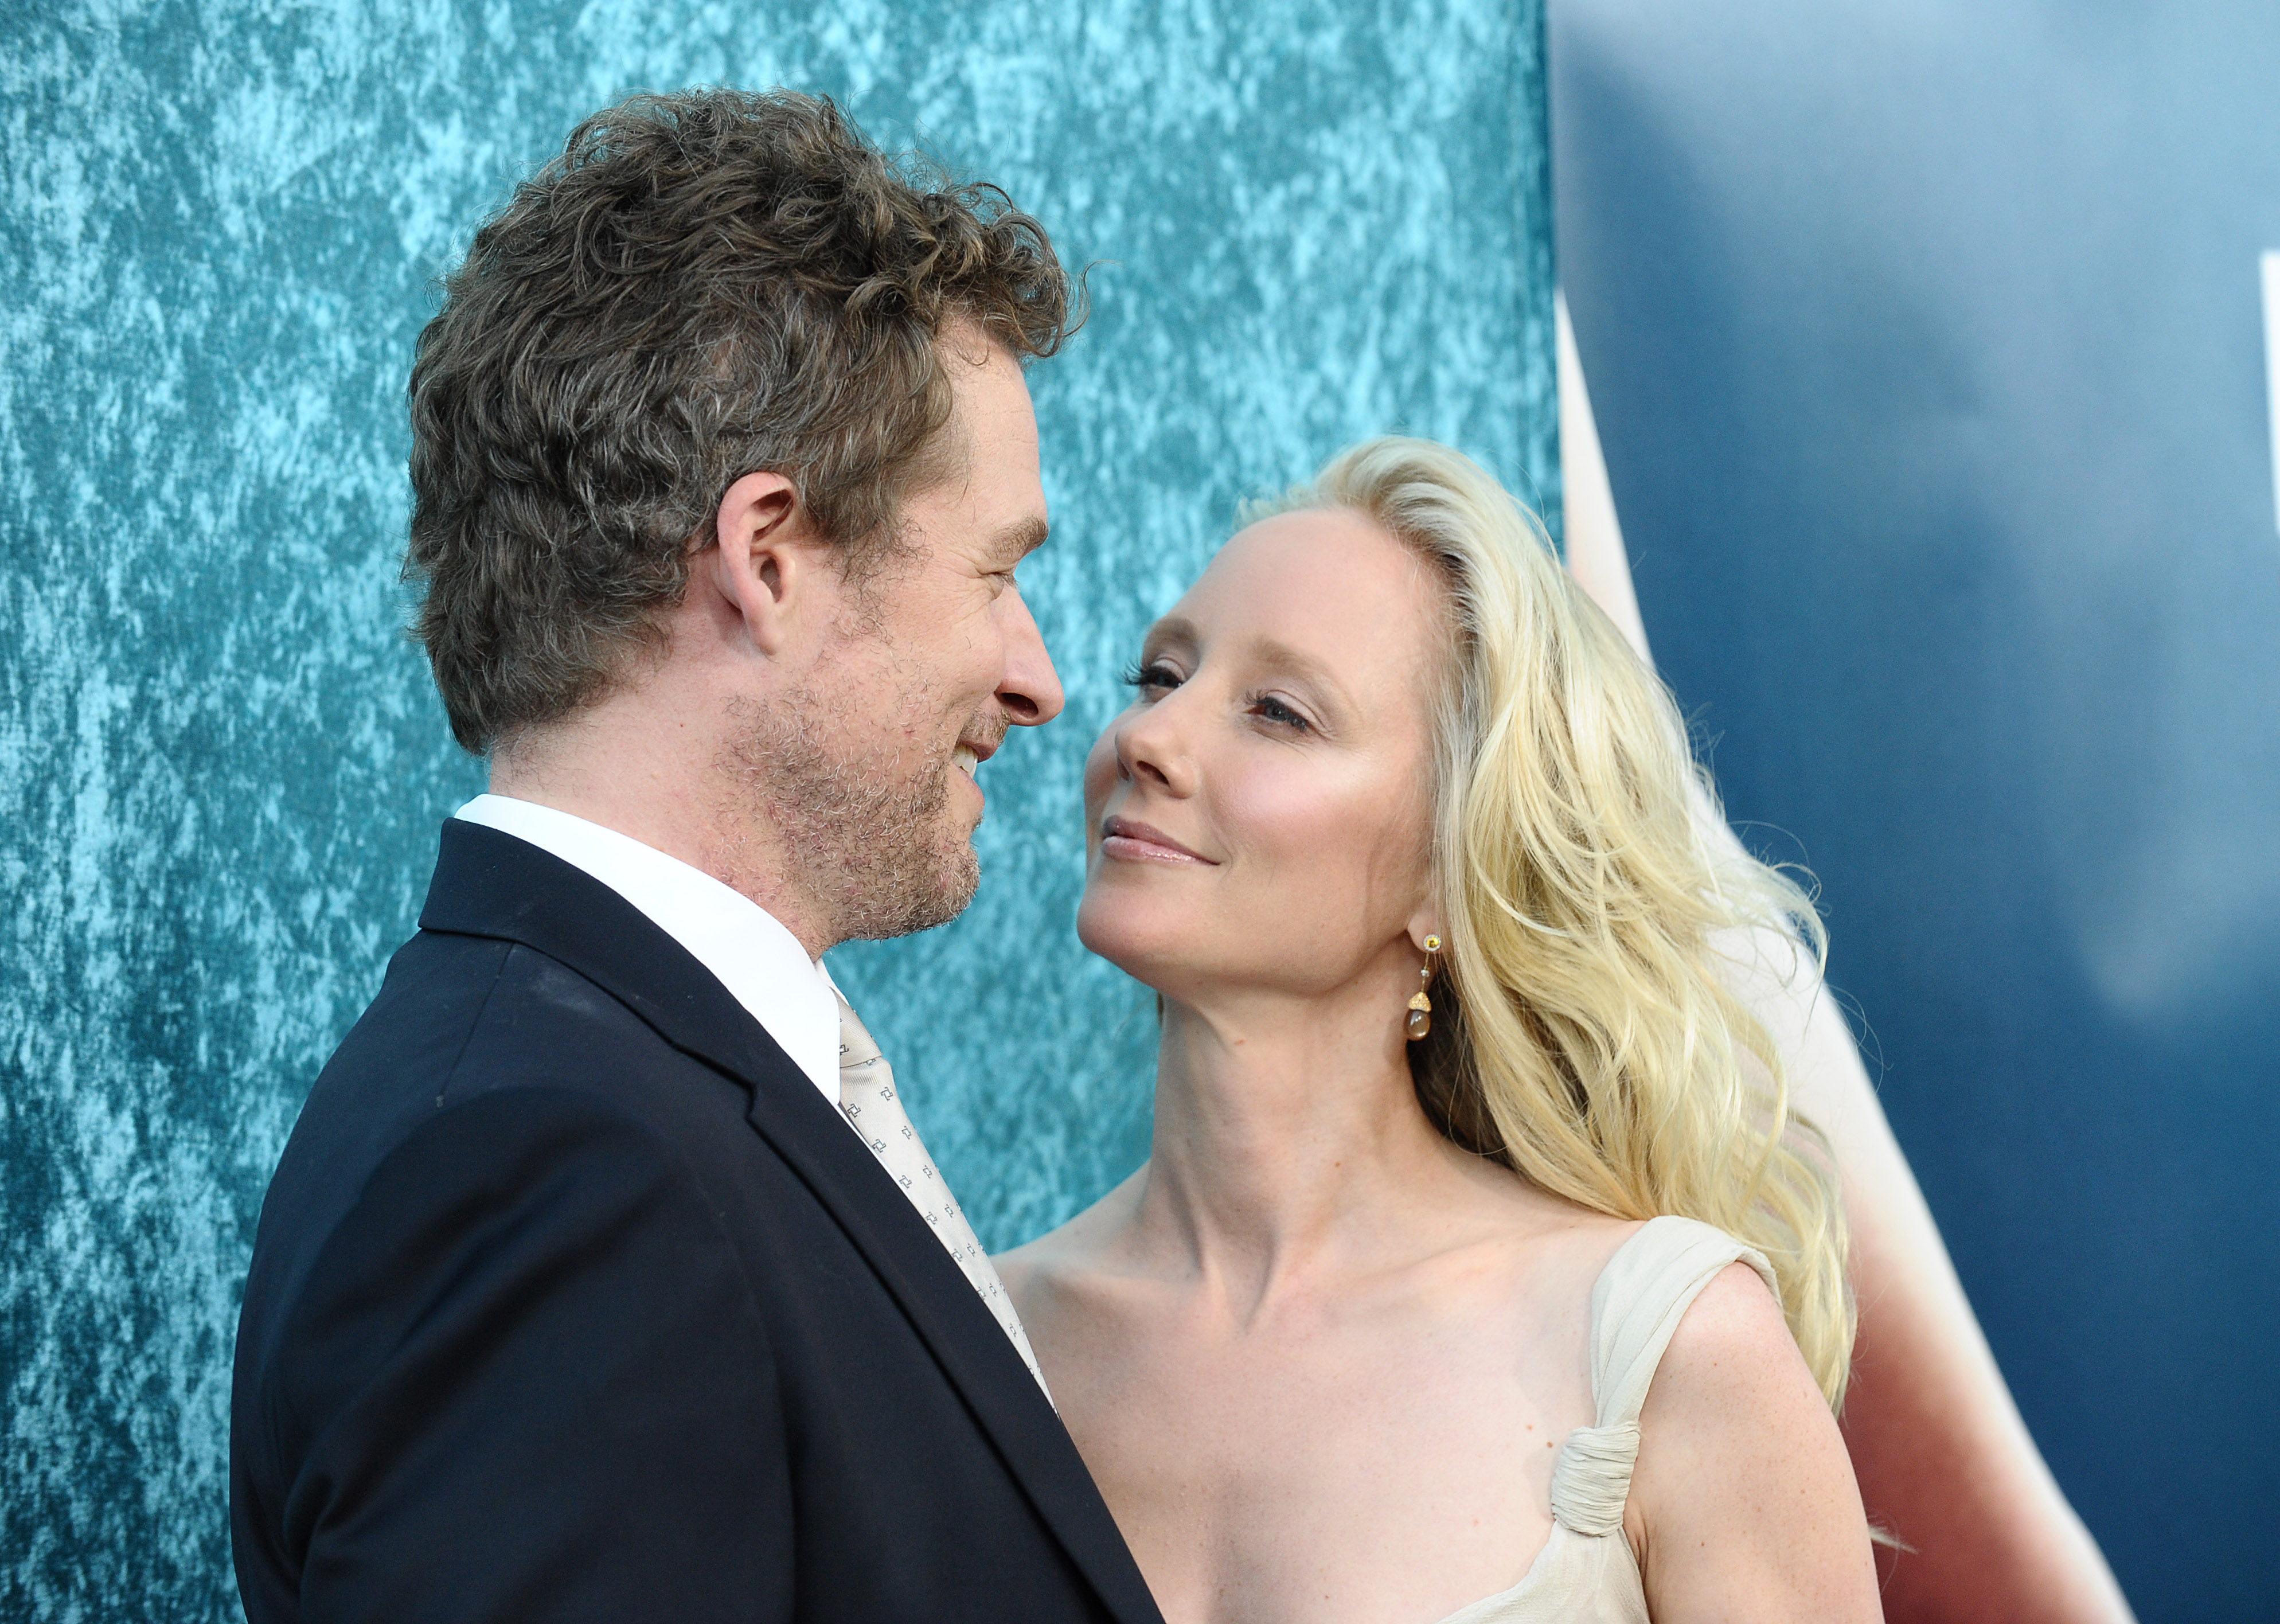 James Tupper and actress Anne Heche attend the Season 2 premiere of HBO's "Hung" at Paramount Theater on the Paramount Studios lot on June 23, 2010 in Hollywood, California. | Source: Getty Images